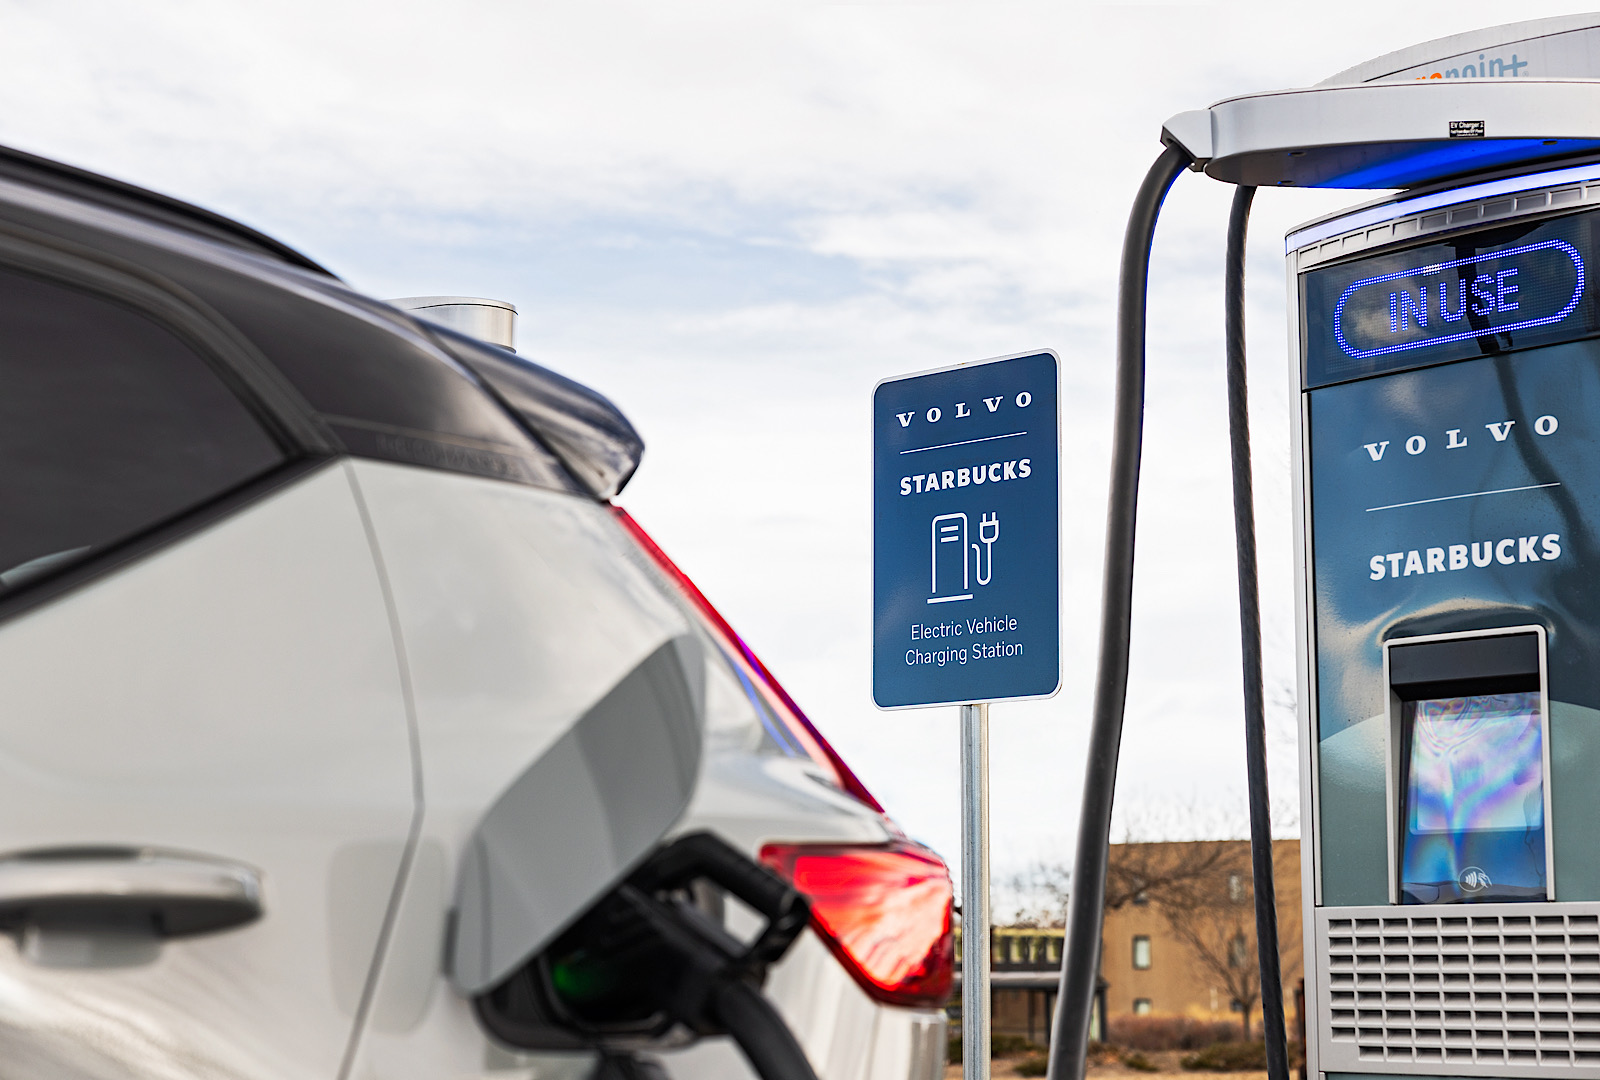 I Drove 1,400 Miles on Starbucks' New Electric Vehicle Charging Route